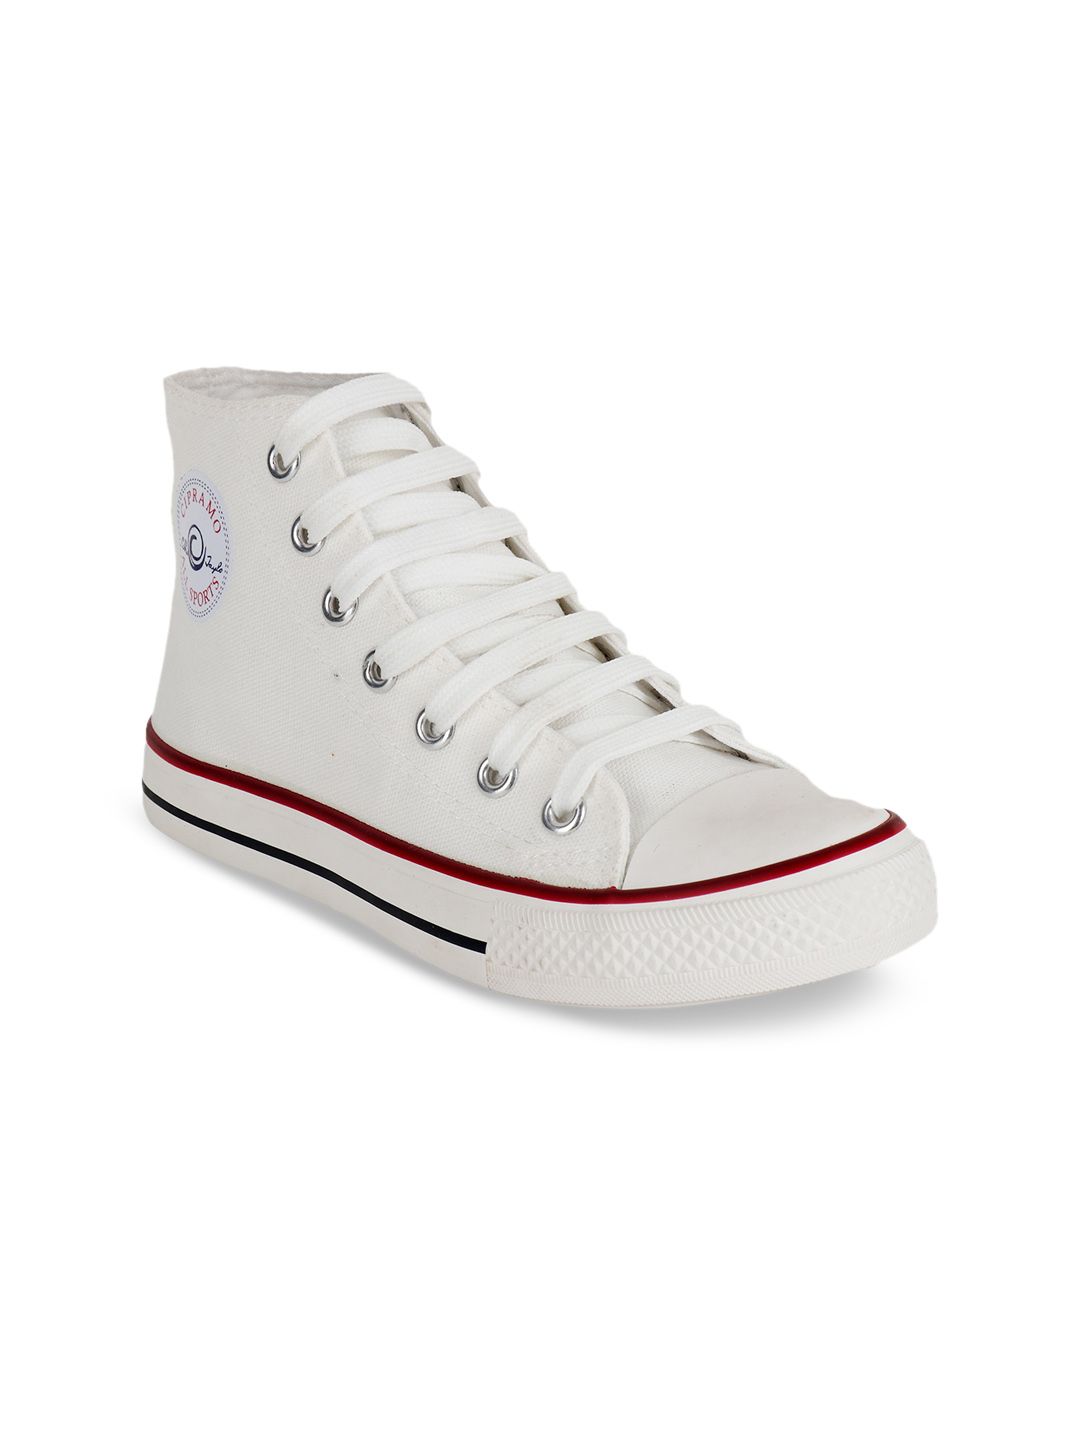 MOZAFIA Women White Printed High-Top Sneakers Price in India